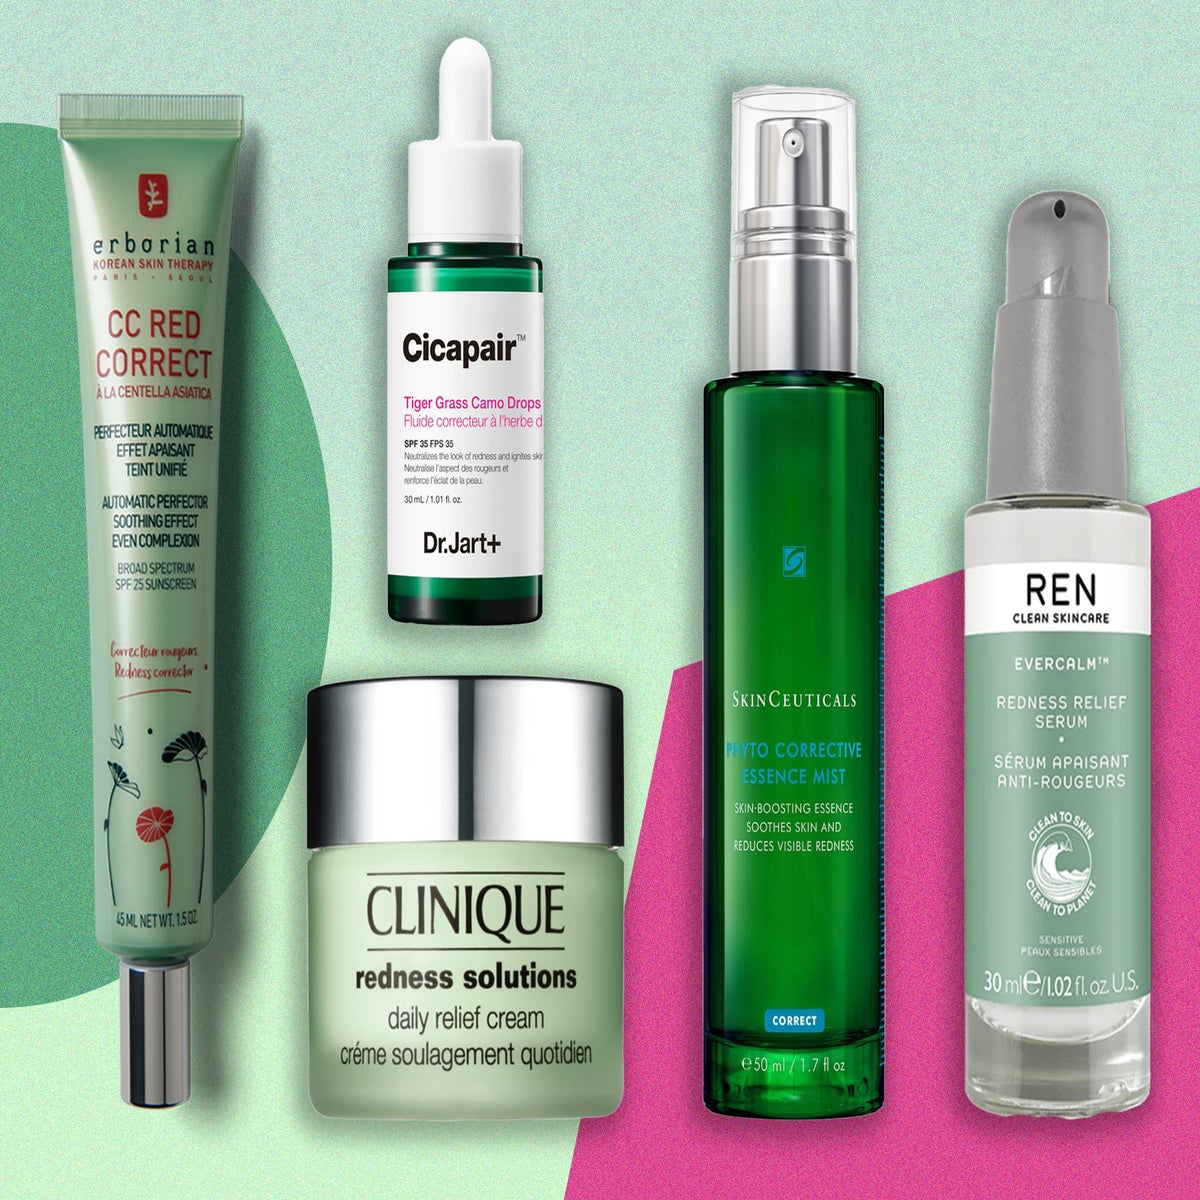 Best anti redness creams, serums, and treatments 2023 calm and colour-correct skin | The Independent